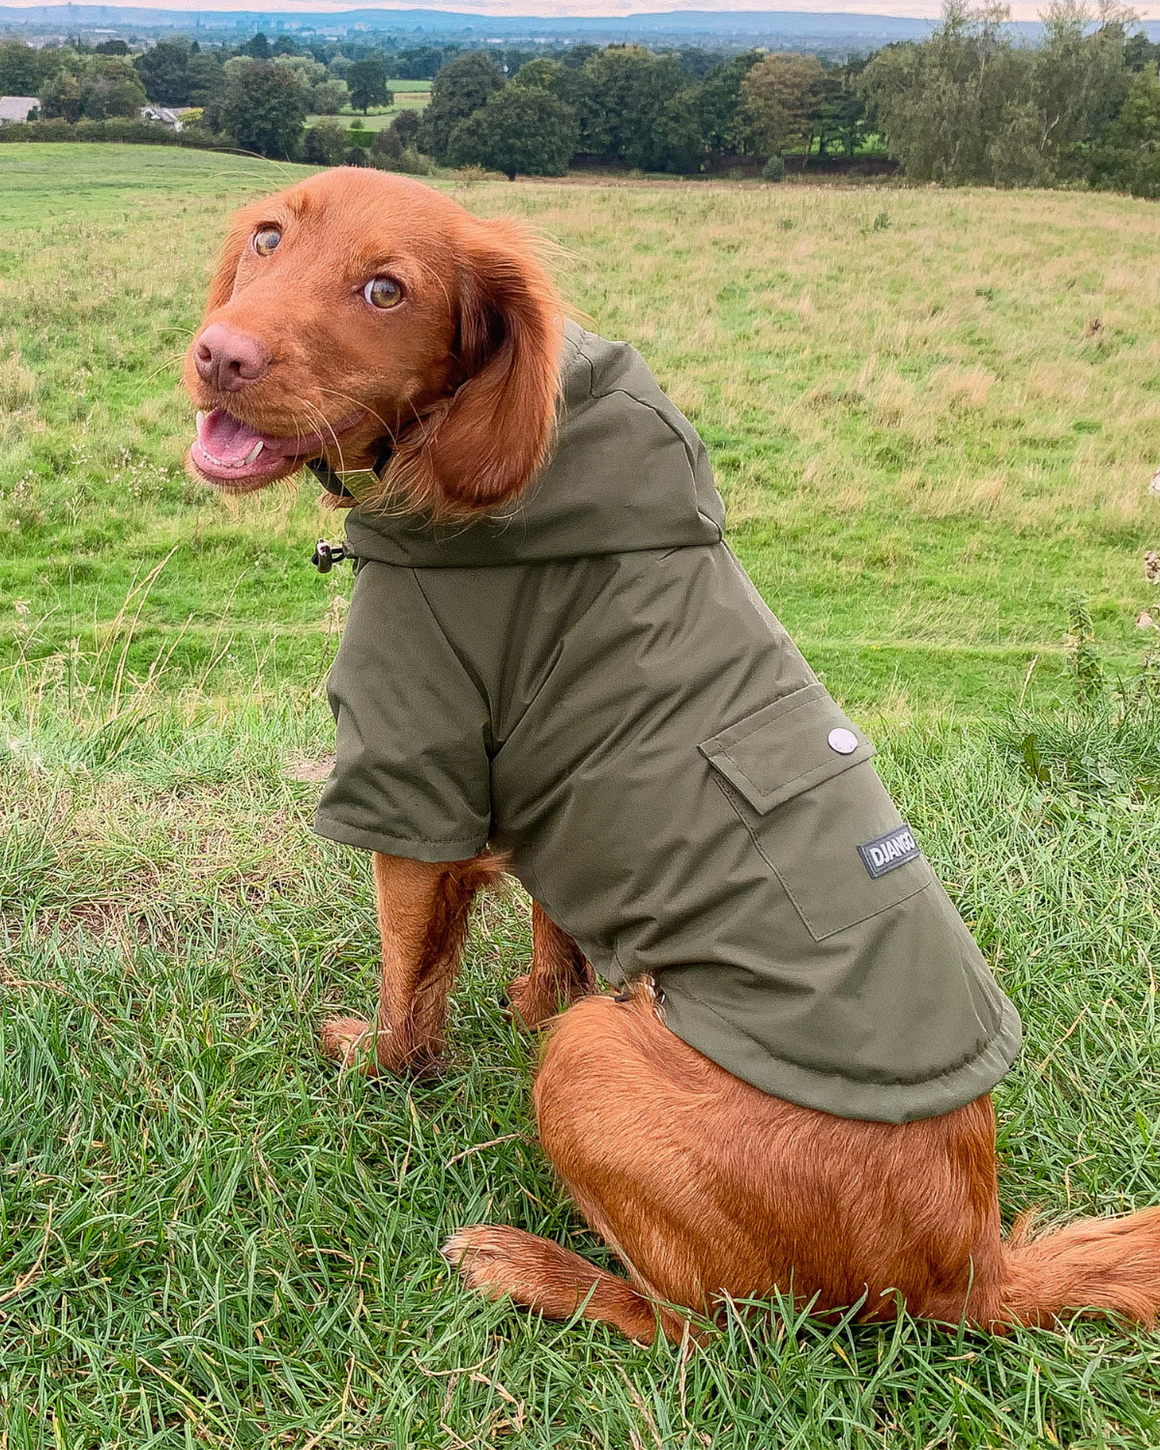 DJANGO Highland Cold Weather Dog Jacket and Raincoat in Olive Green - Made of water-repellent performance fabric, DJANGO's Highland Dog Jacket and Raincoat is a beautiful, stylish, and super functional dog coat. The soft-to-the-touch exterior shell will shield your pup from rain, snow, dirt, and windchill - djangobrand.com